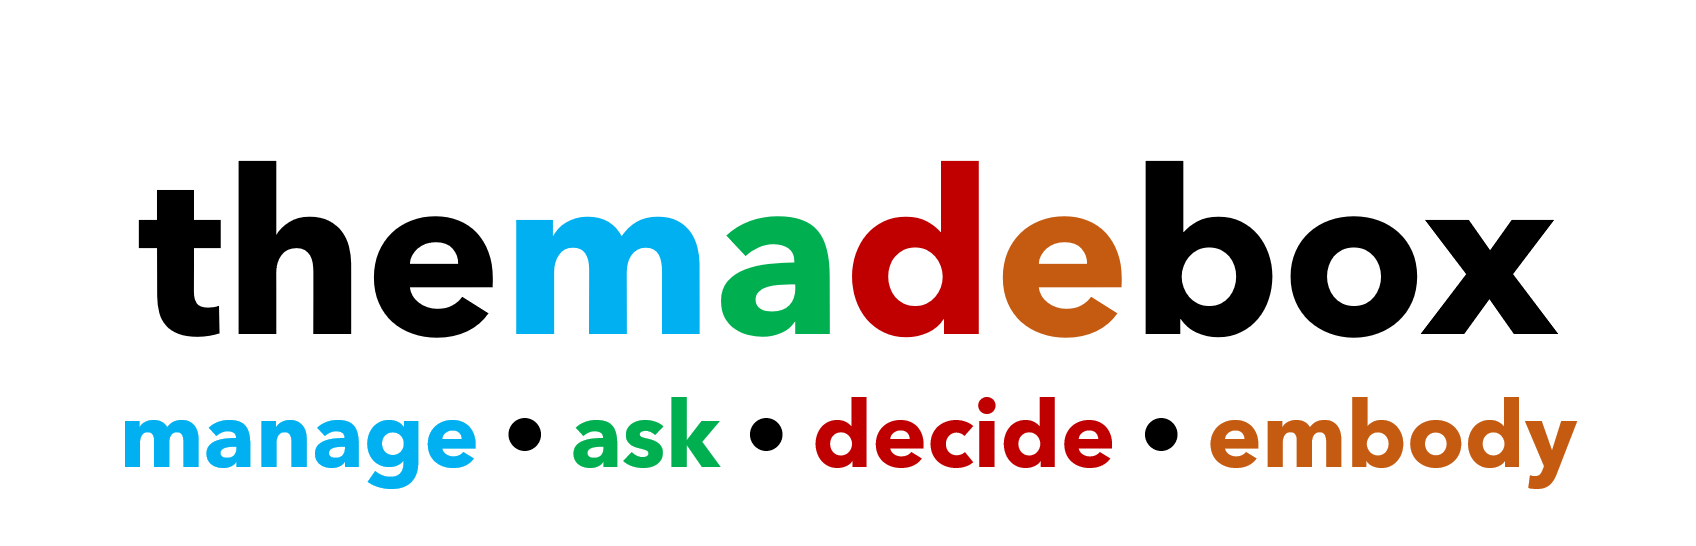 themadebox by M.A.D.E. To Lead